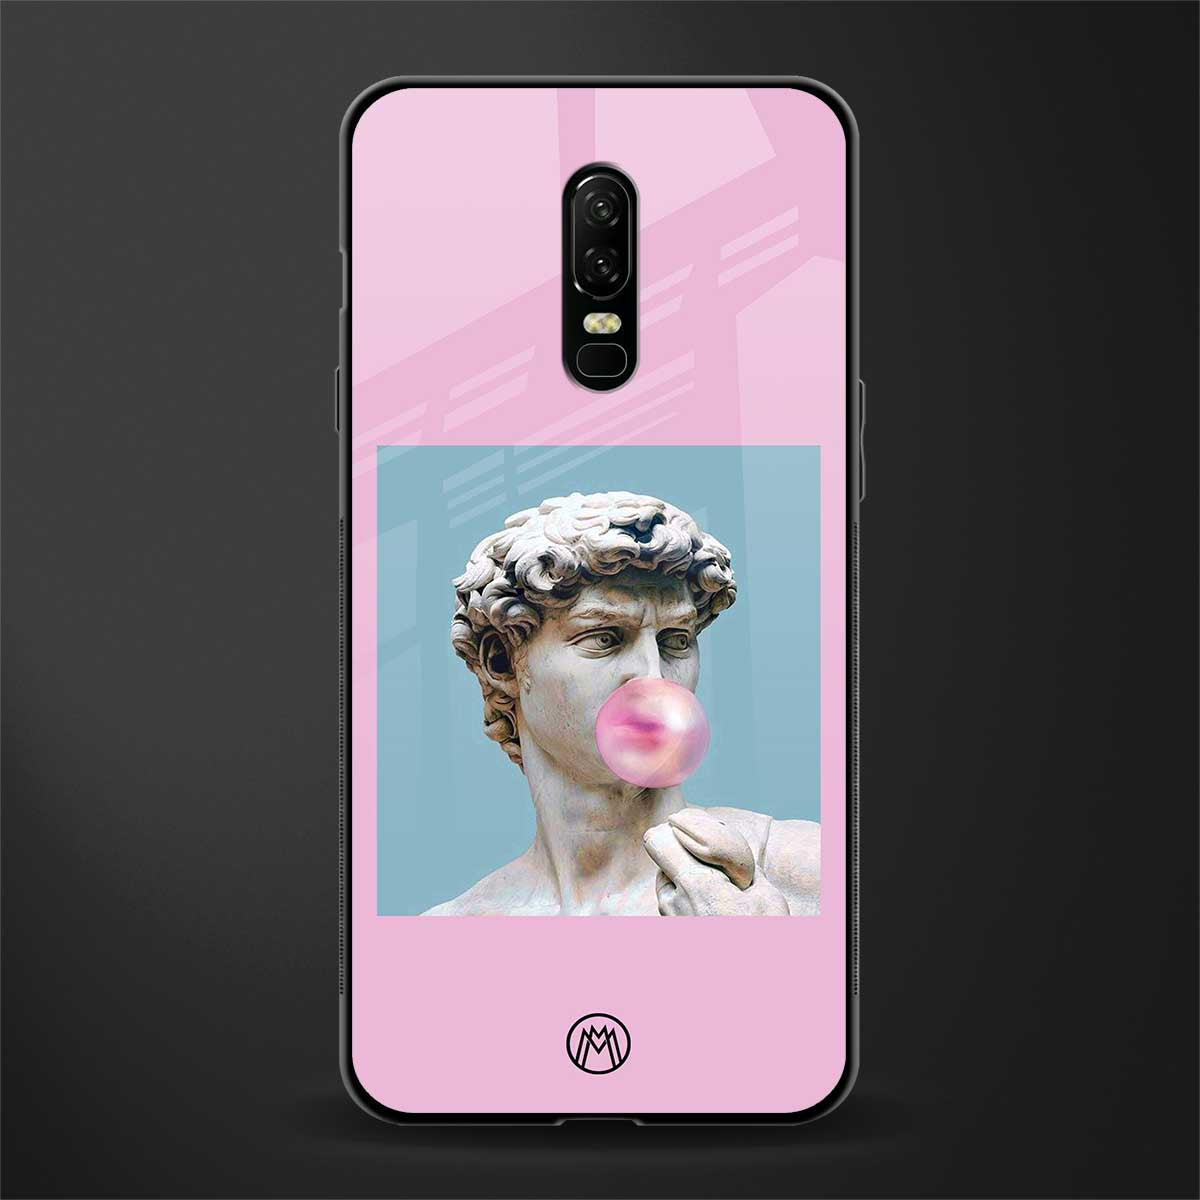 dope david michelangelo glass case for oneplus 6 image